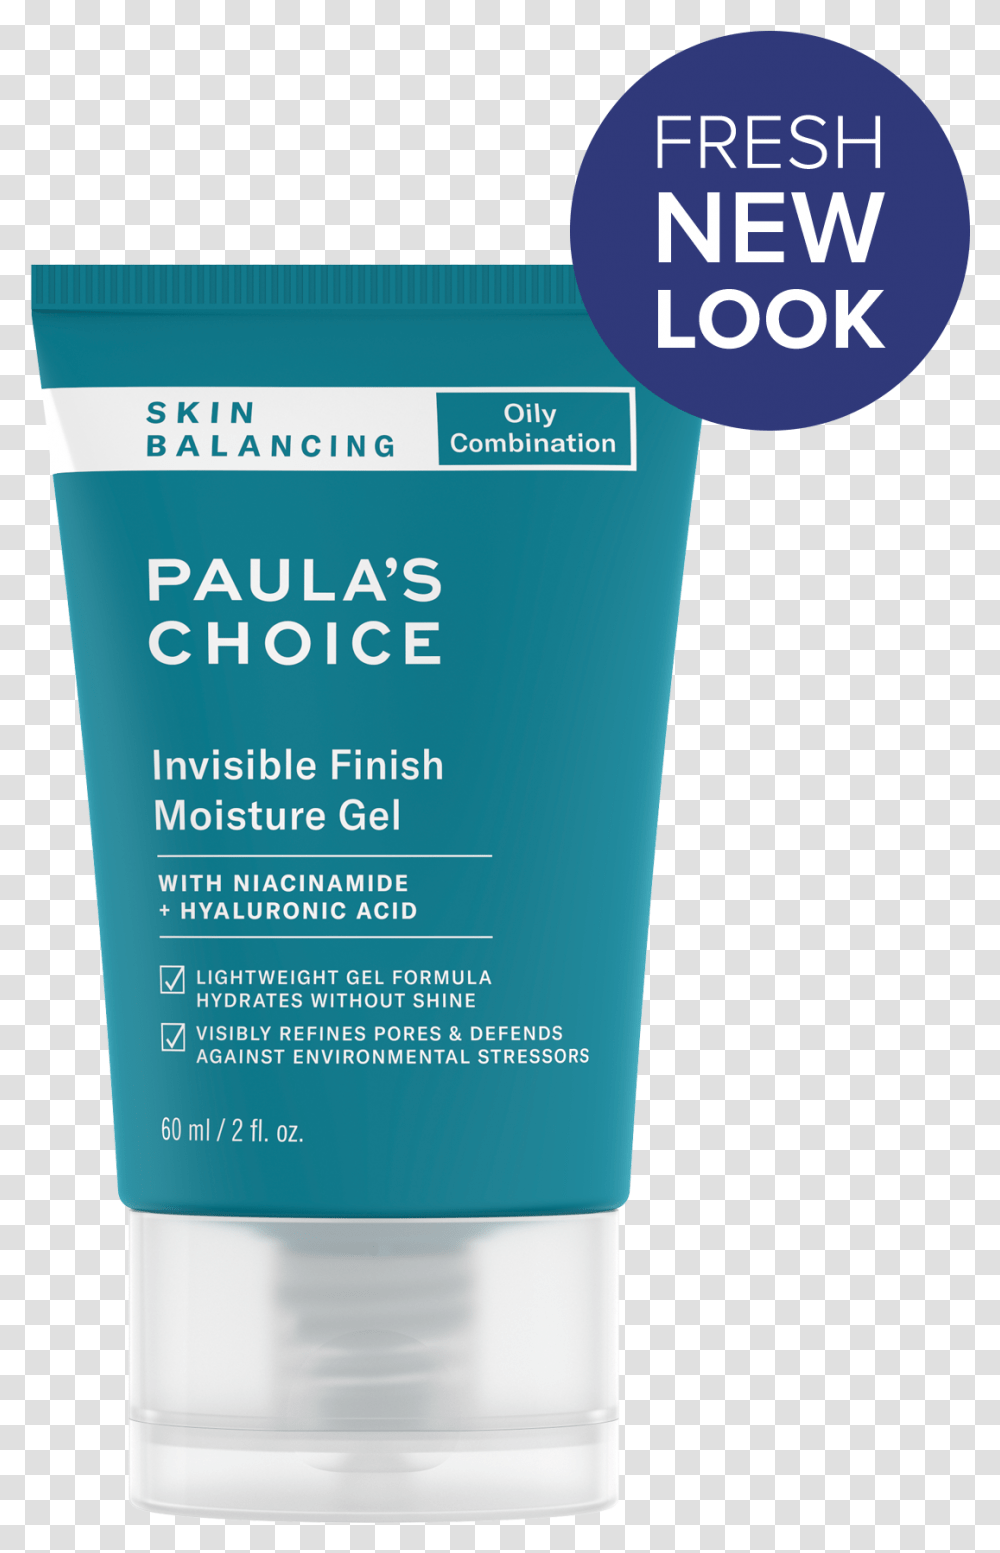 Skin Balancing Invisible Finish Moisture Gel Cosmetics, Sunscreen, Bottle, Flyer, Poster Transparent Png